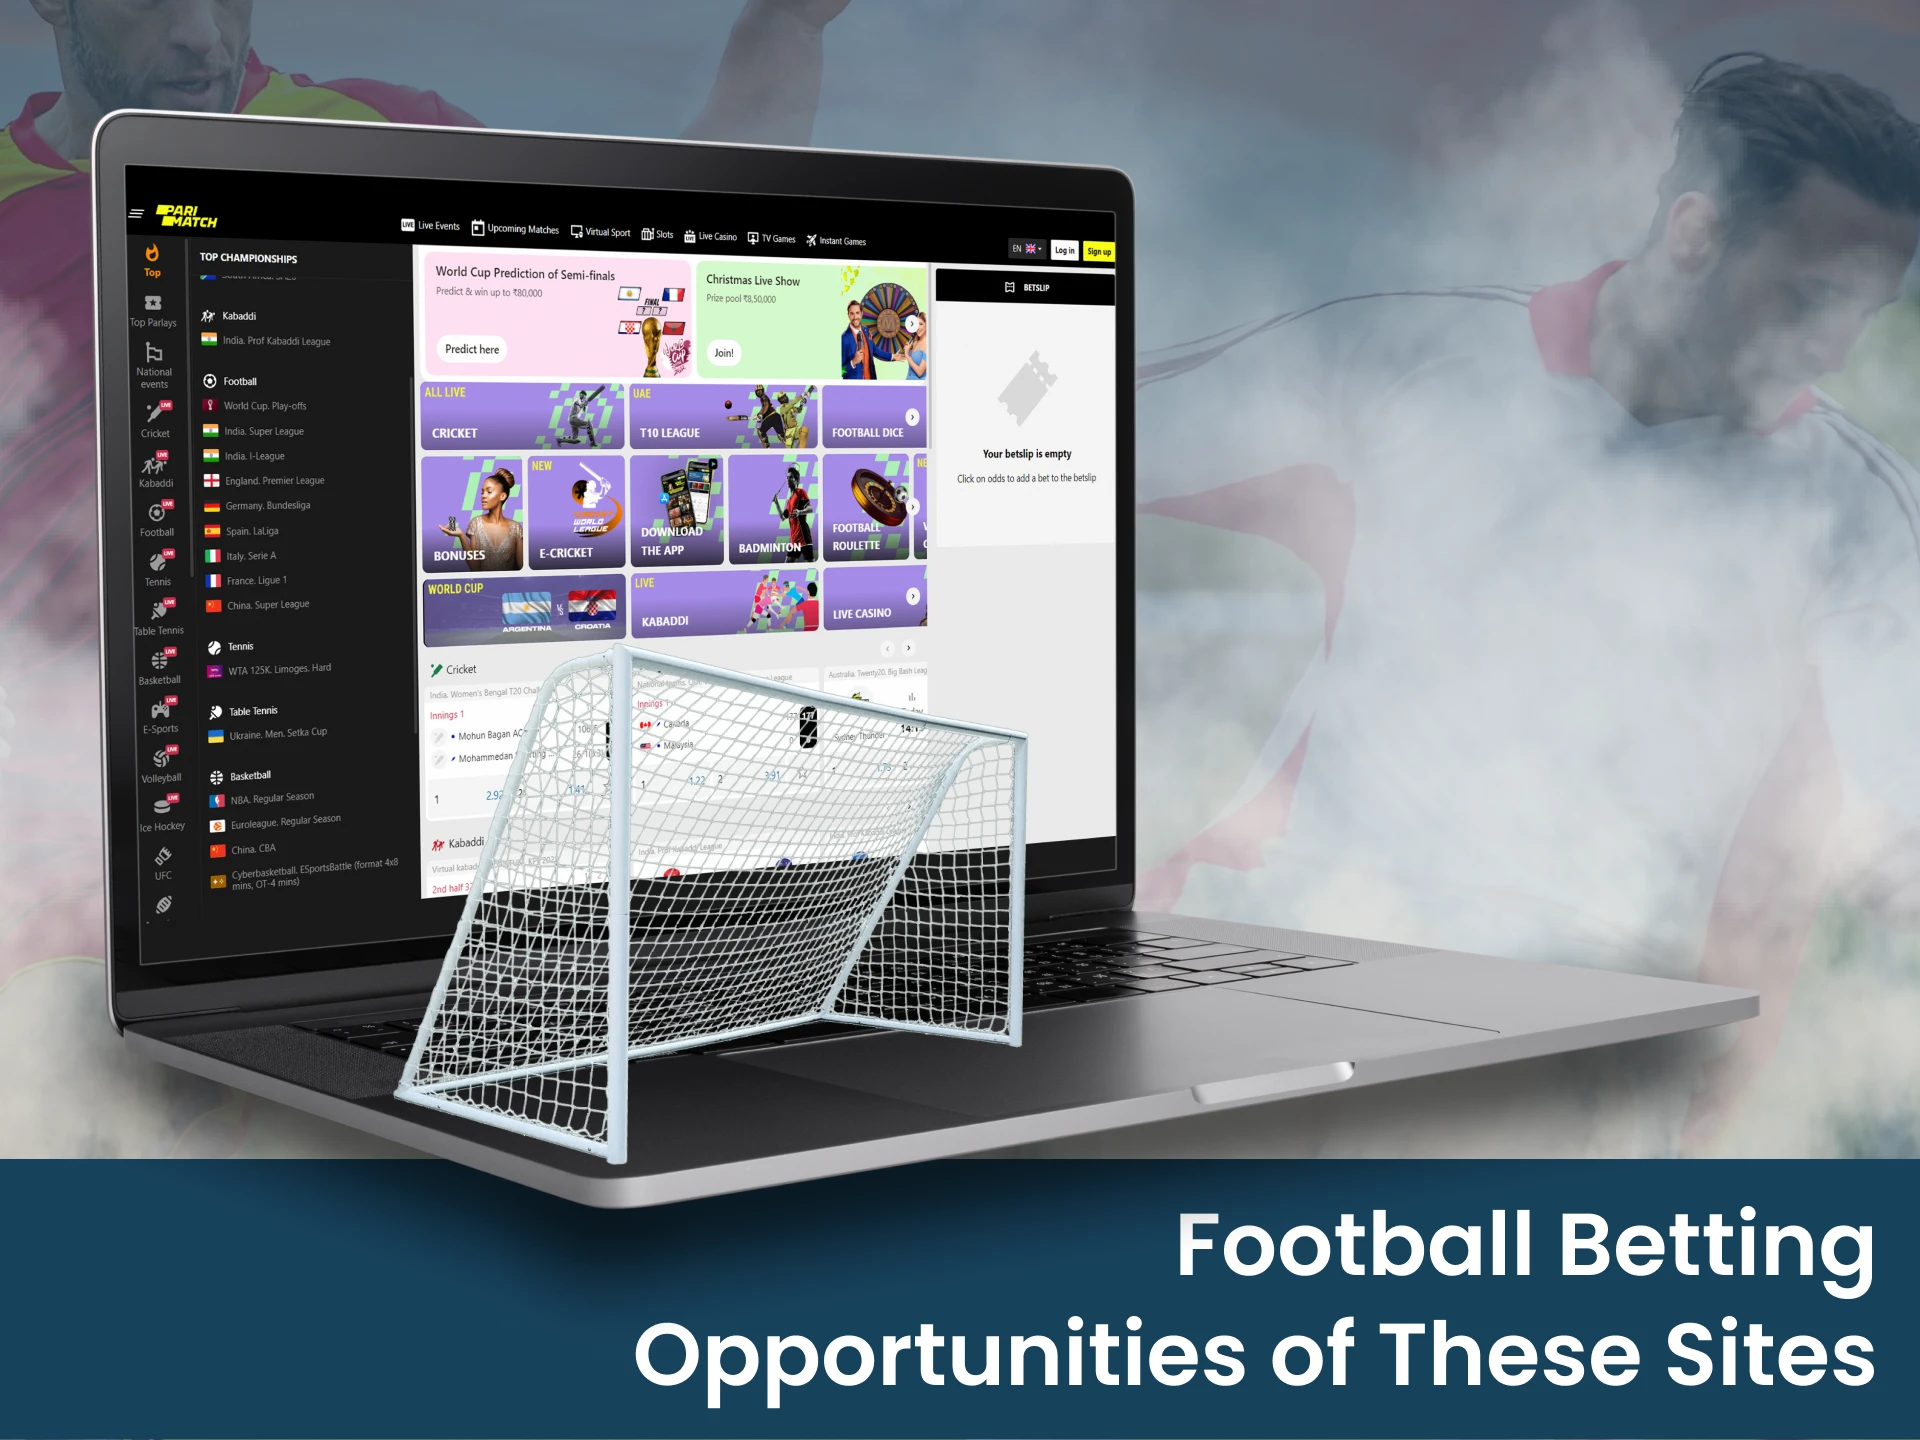 You will find lots of entertainment on these betting sites.